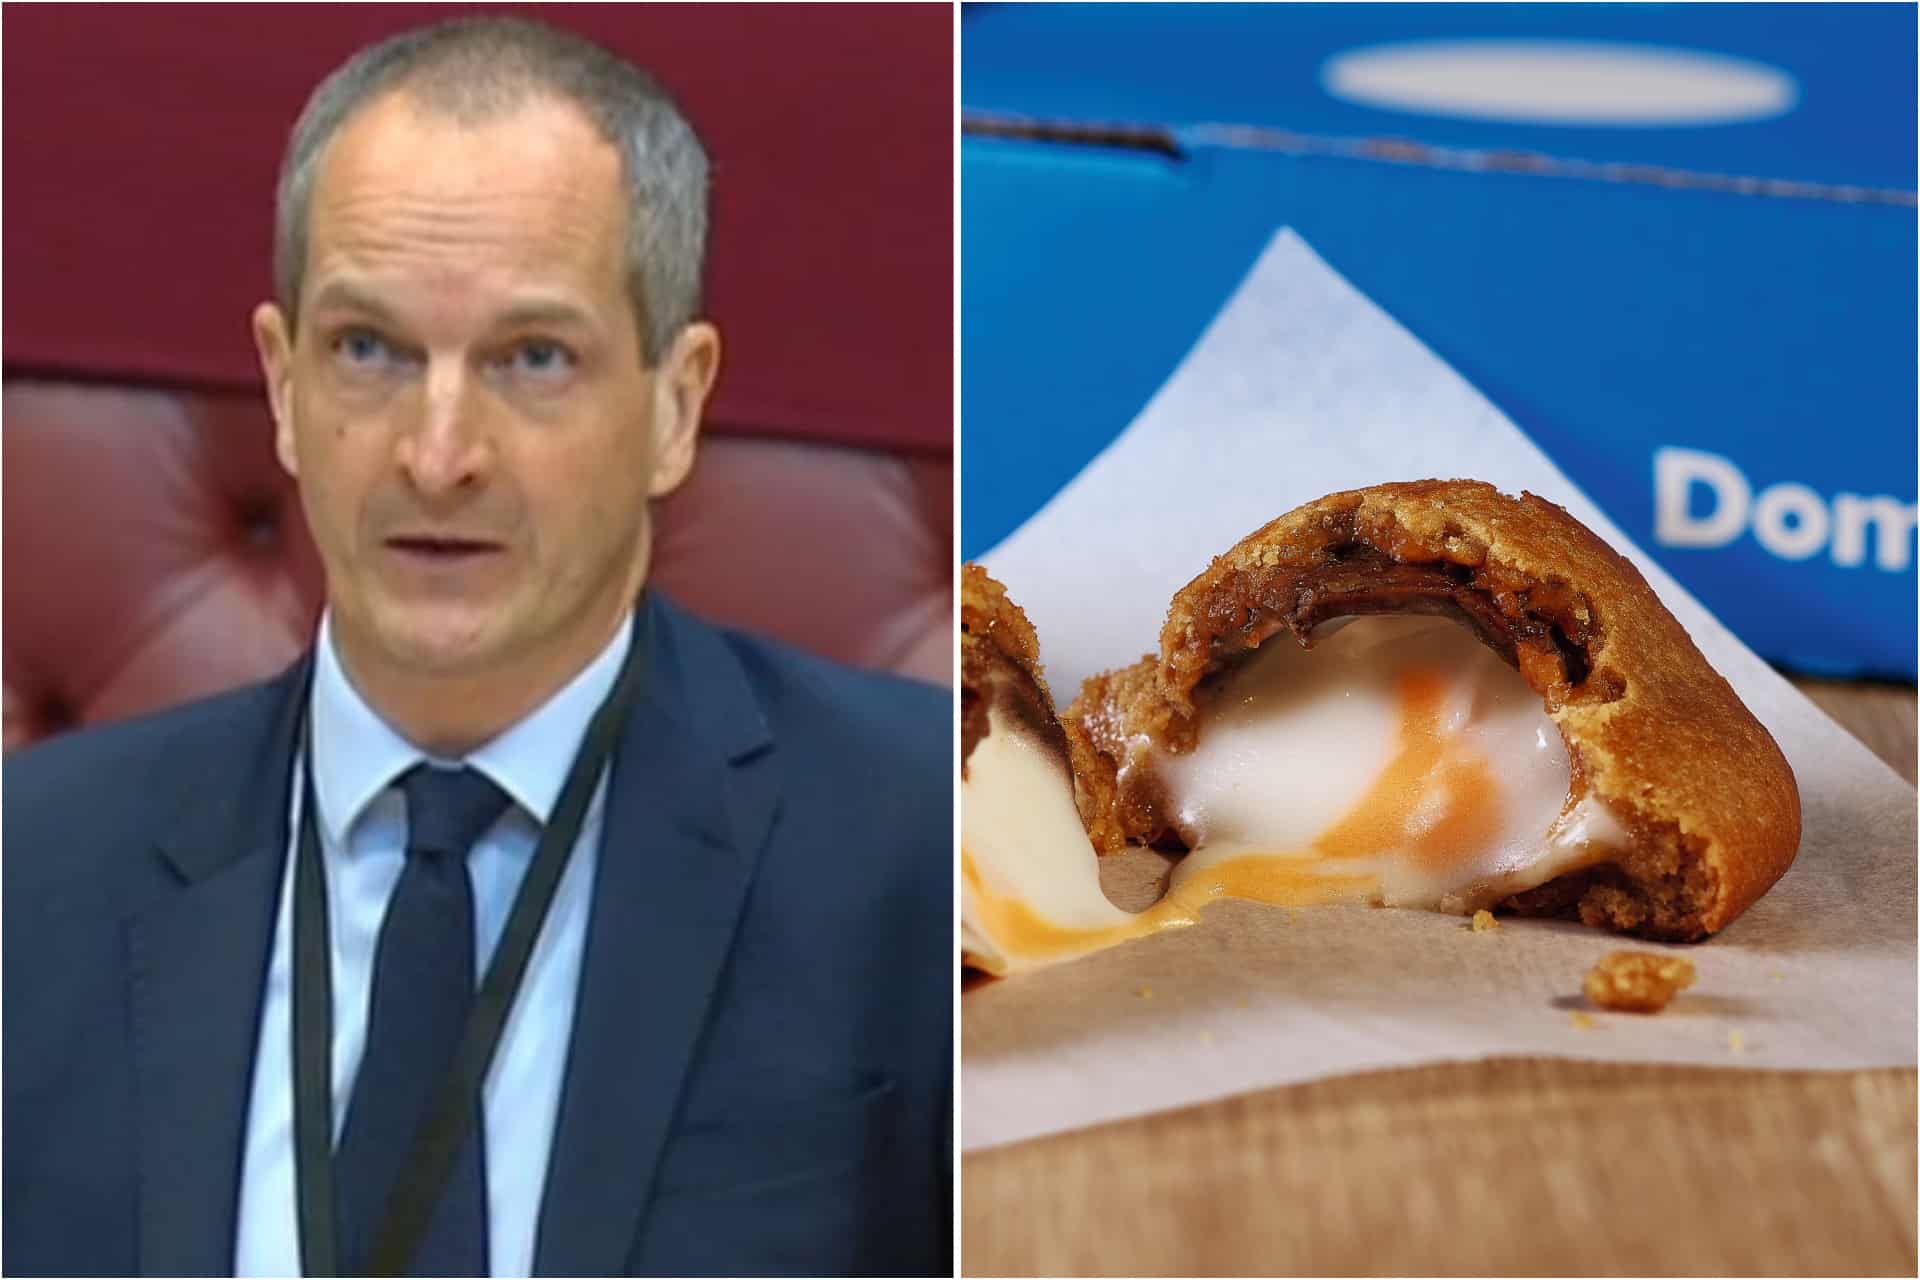 Tory peer hits out at Domino’s over ‘disgusting’ new menu item